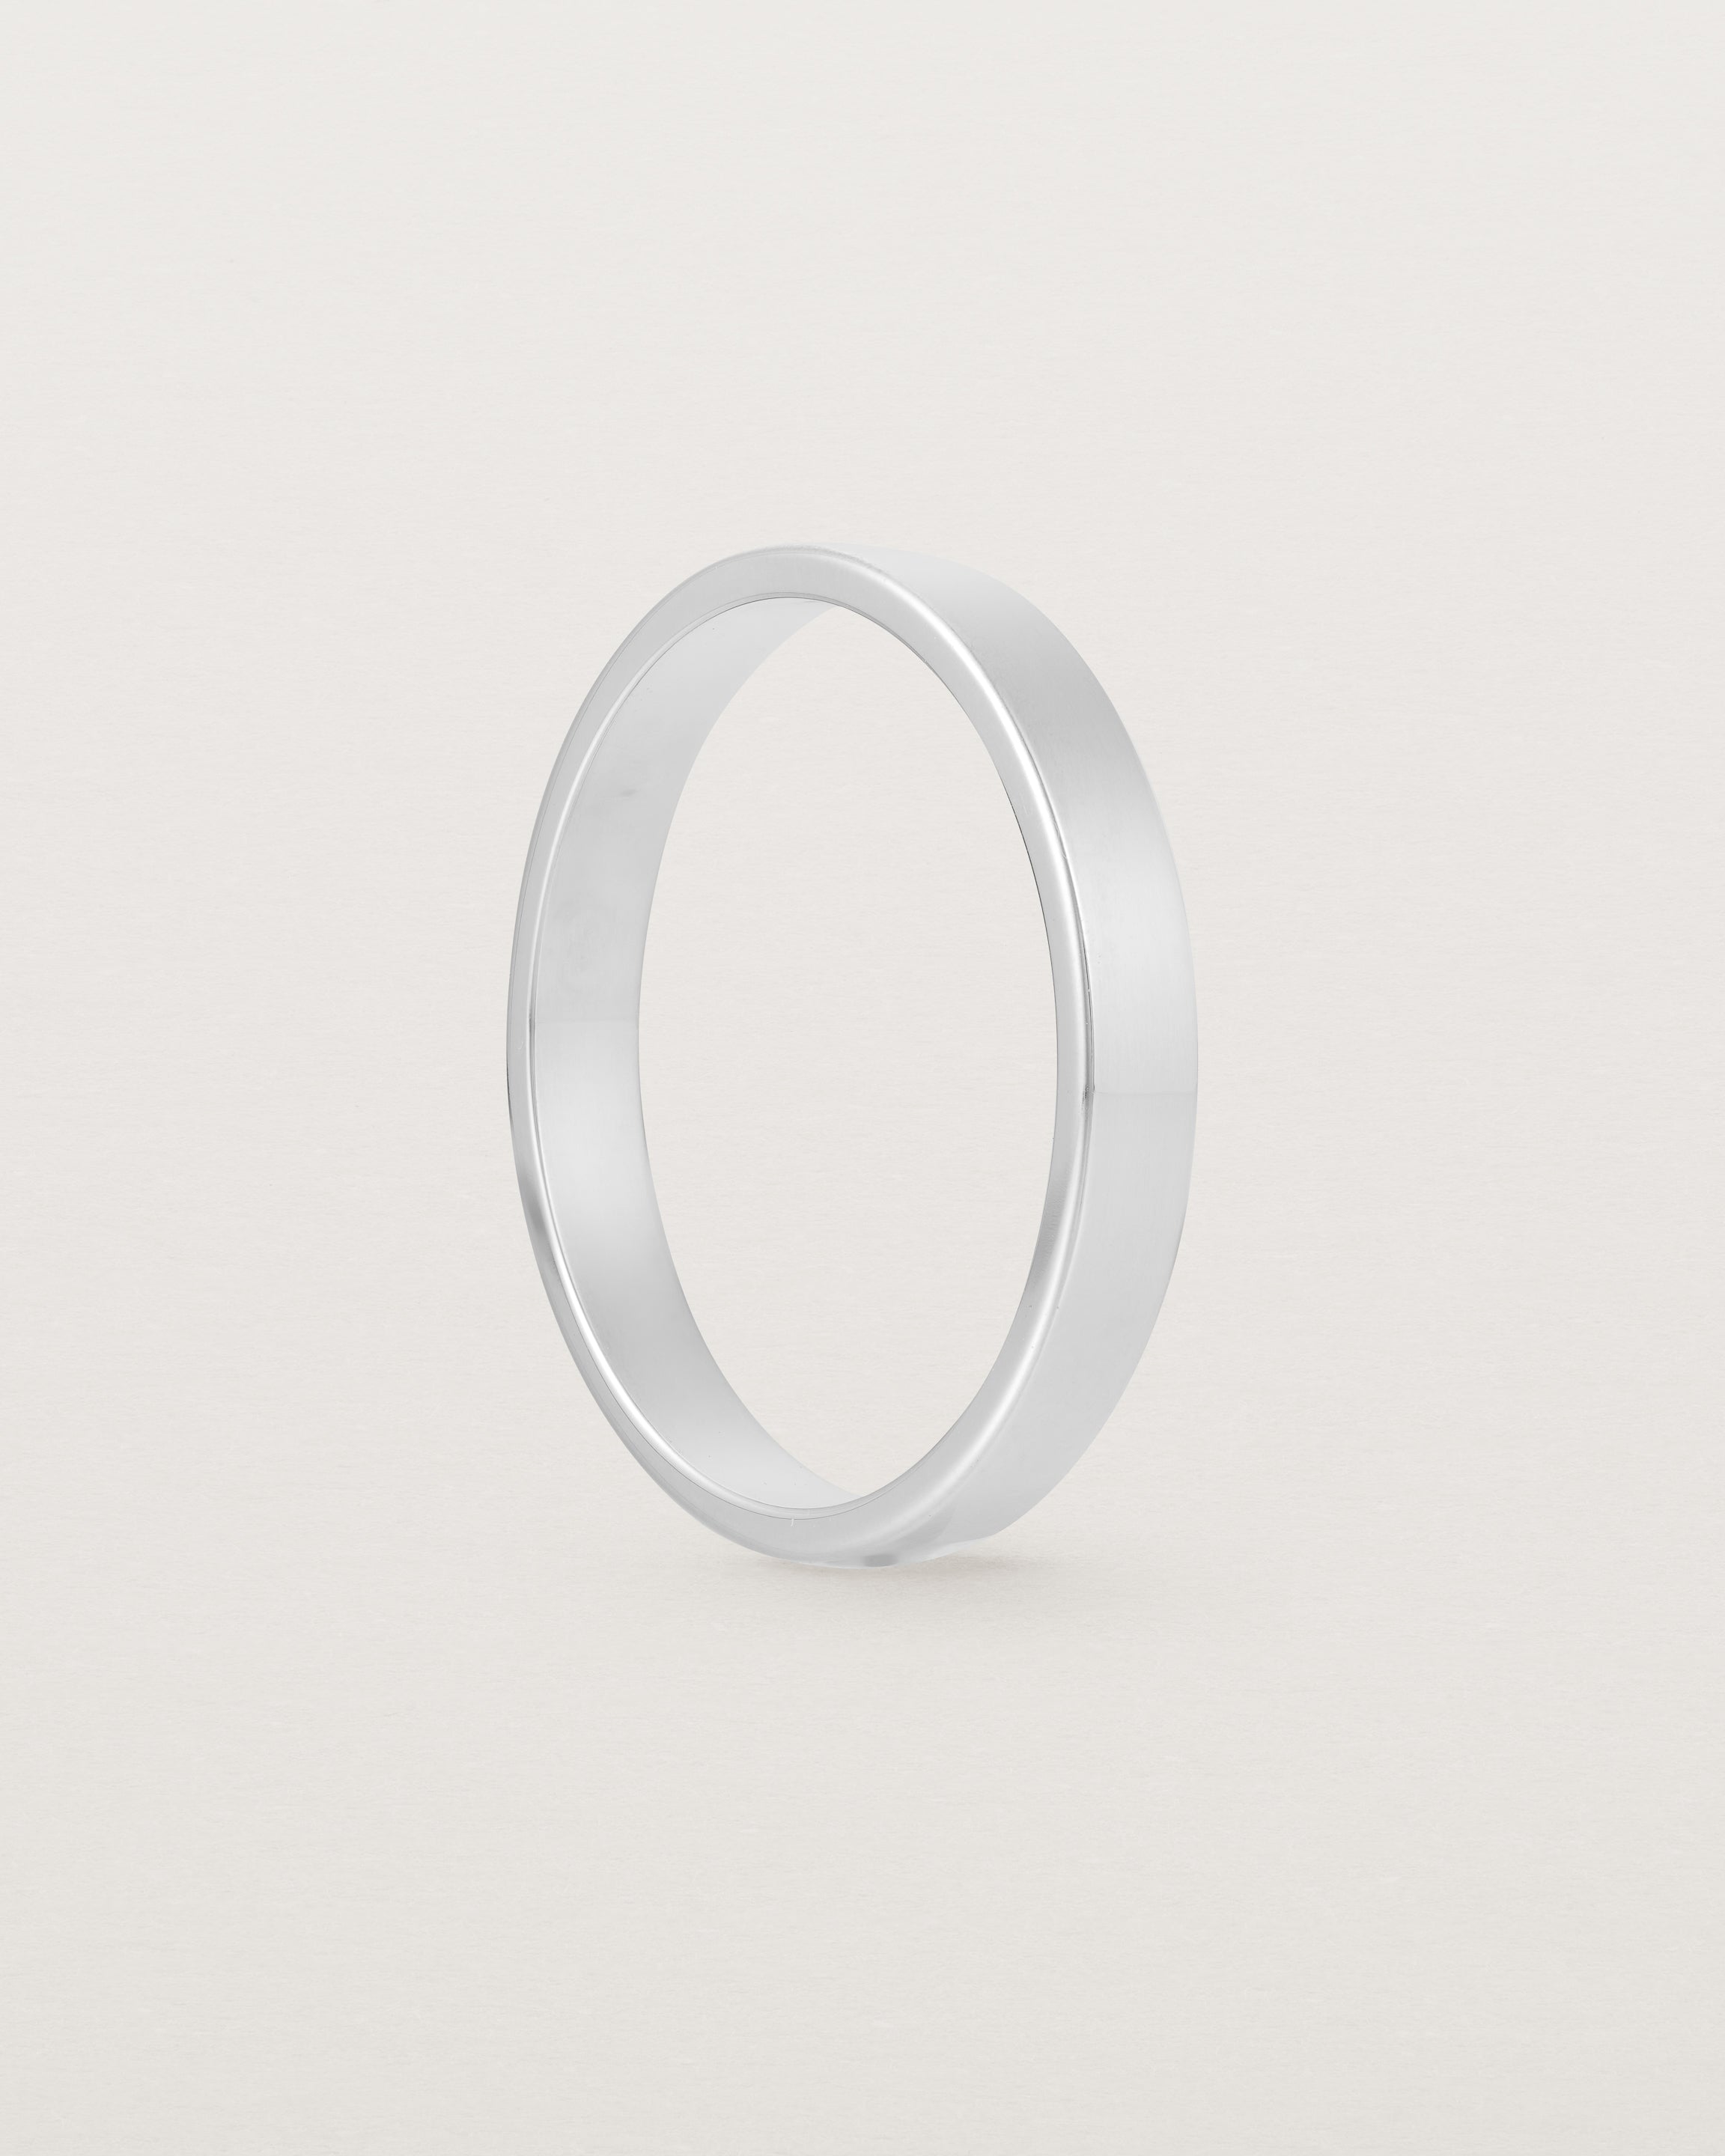 The side profile of our square, flat 3mm profile wedding band crafted in white gold